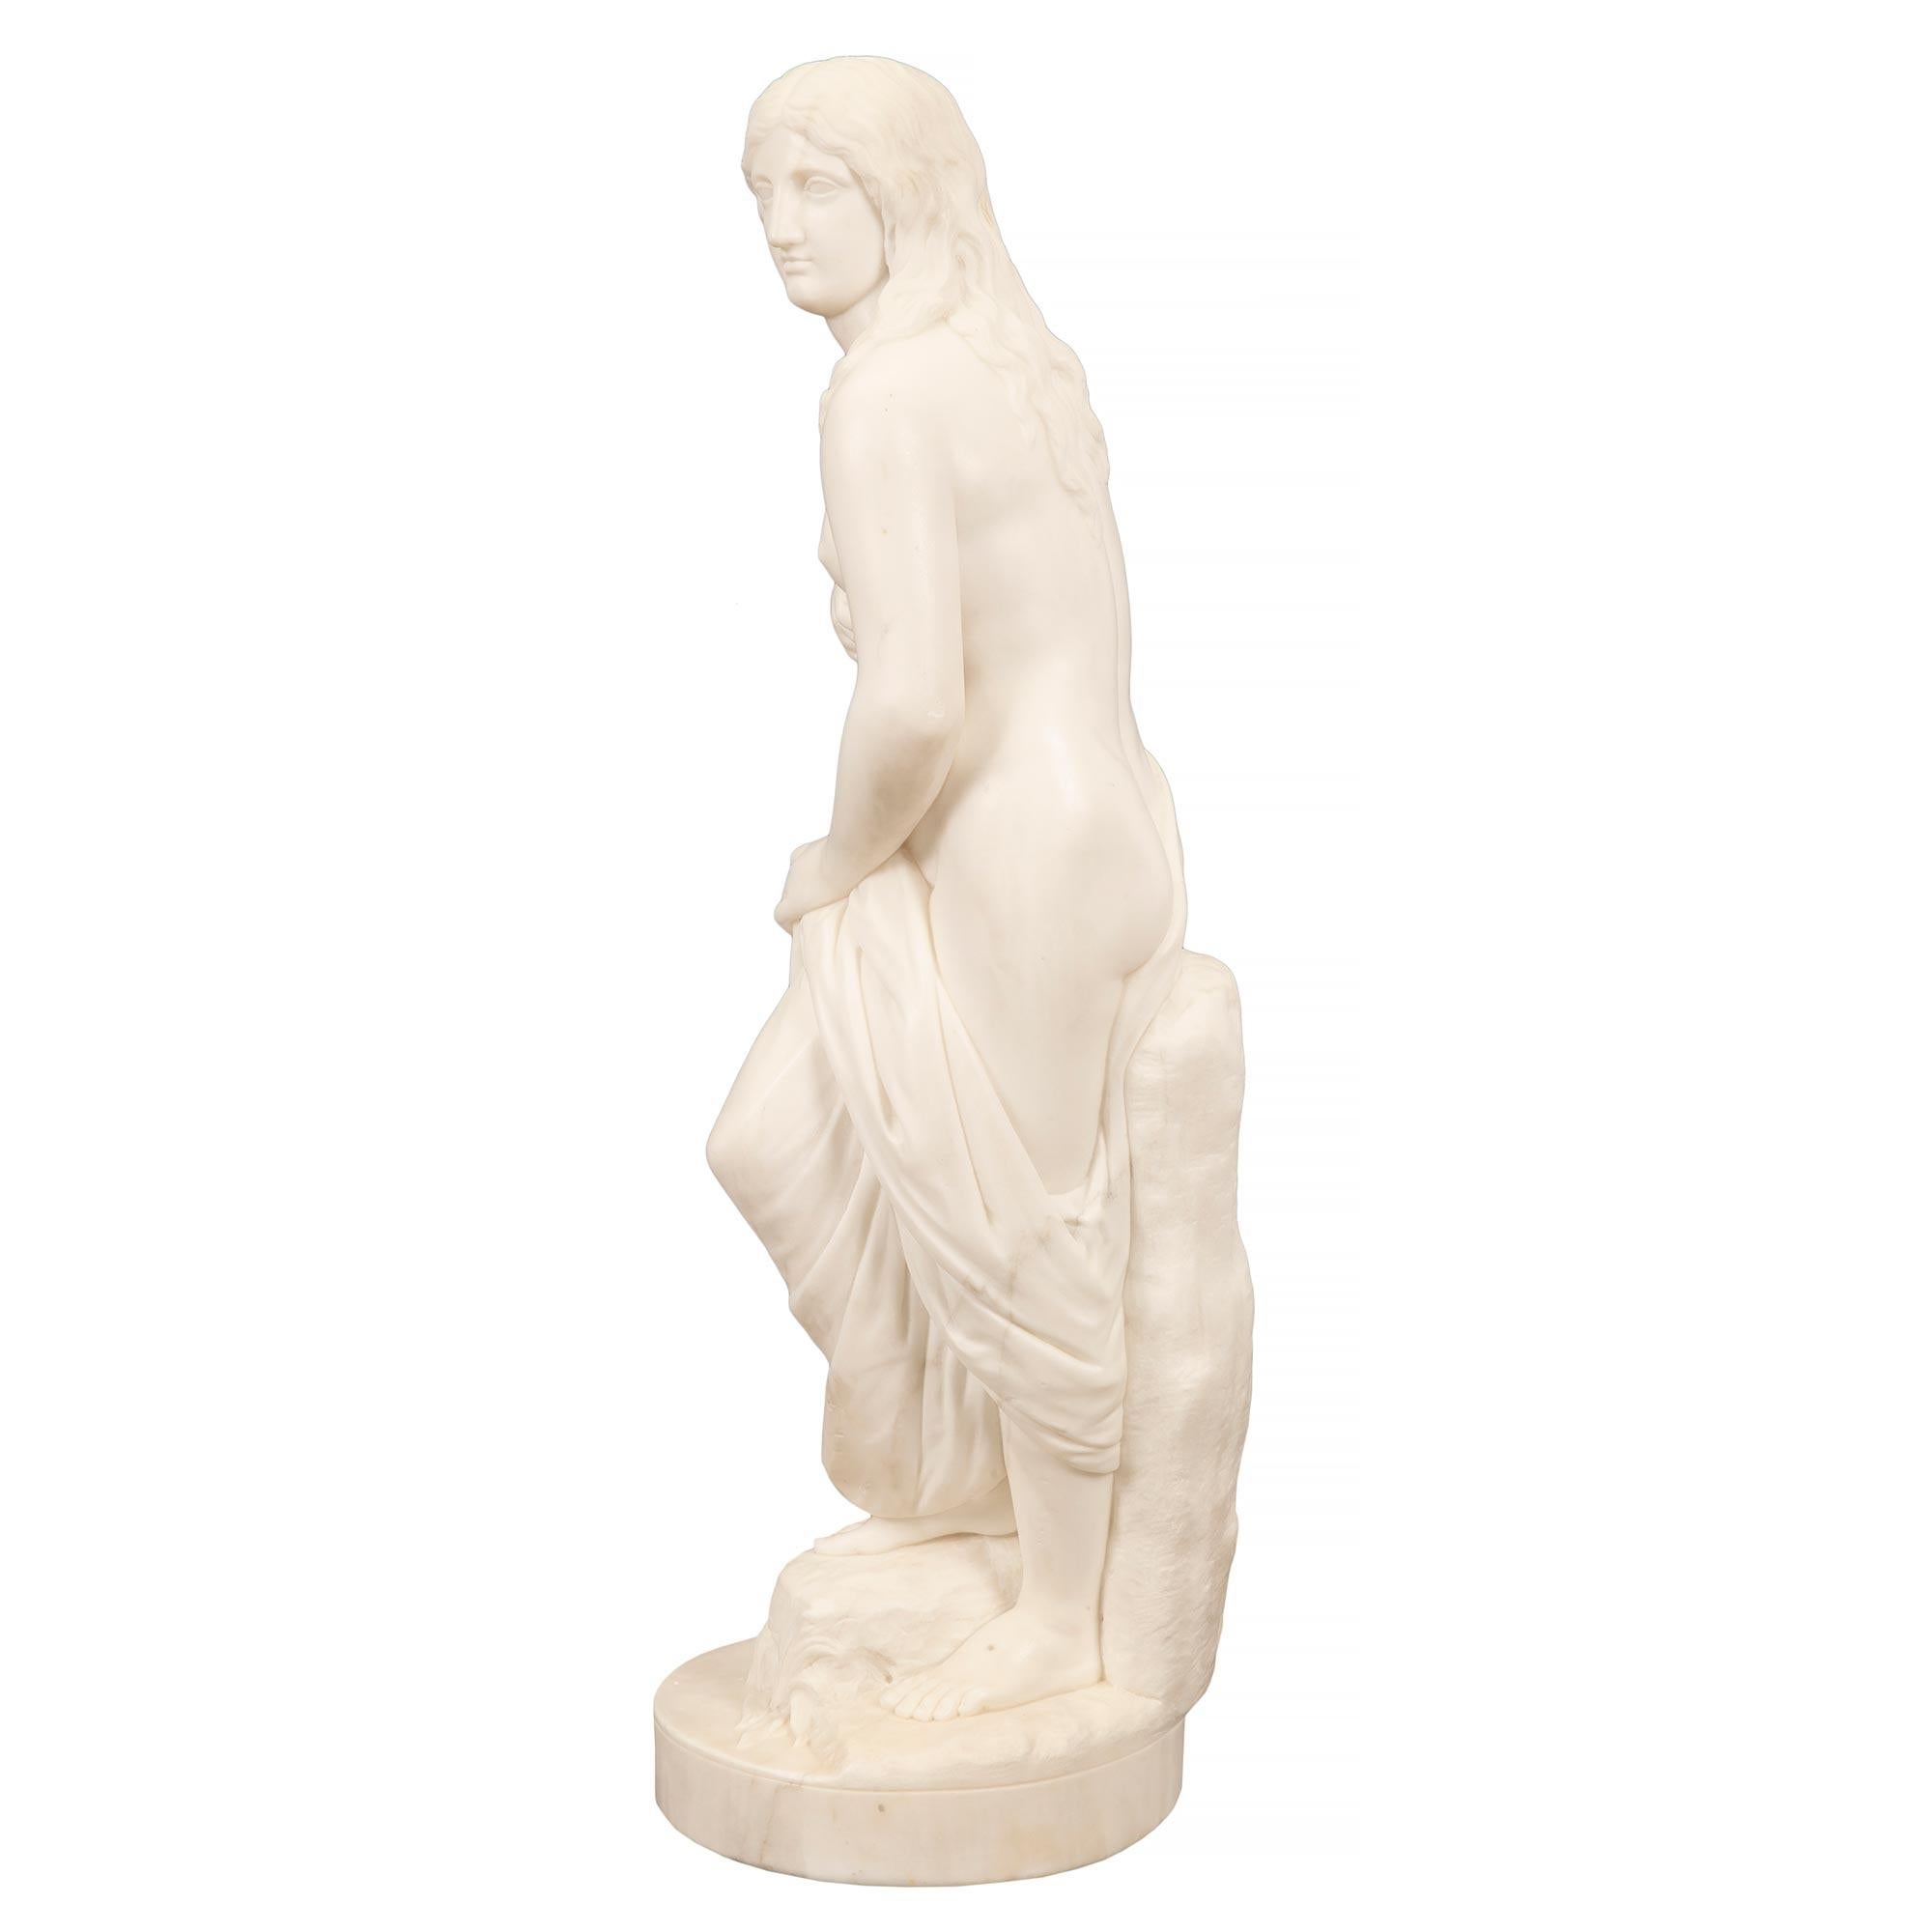 Italian 19th Century Neoclassical St. Marble Statue Of “La Baigneuse” In Good Condition For Sale In West Palm Beach, FL